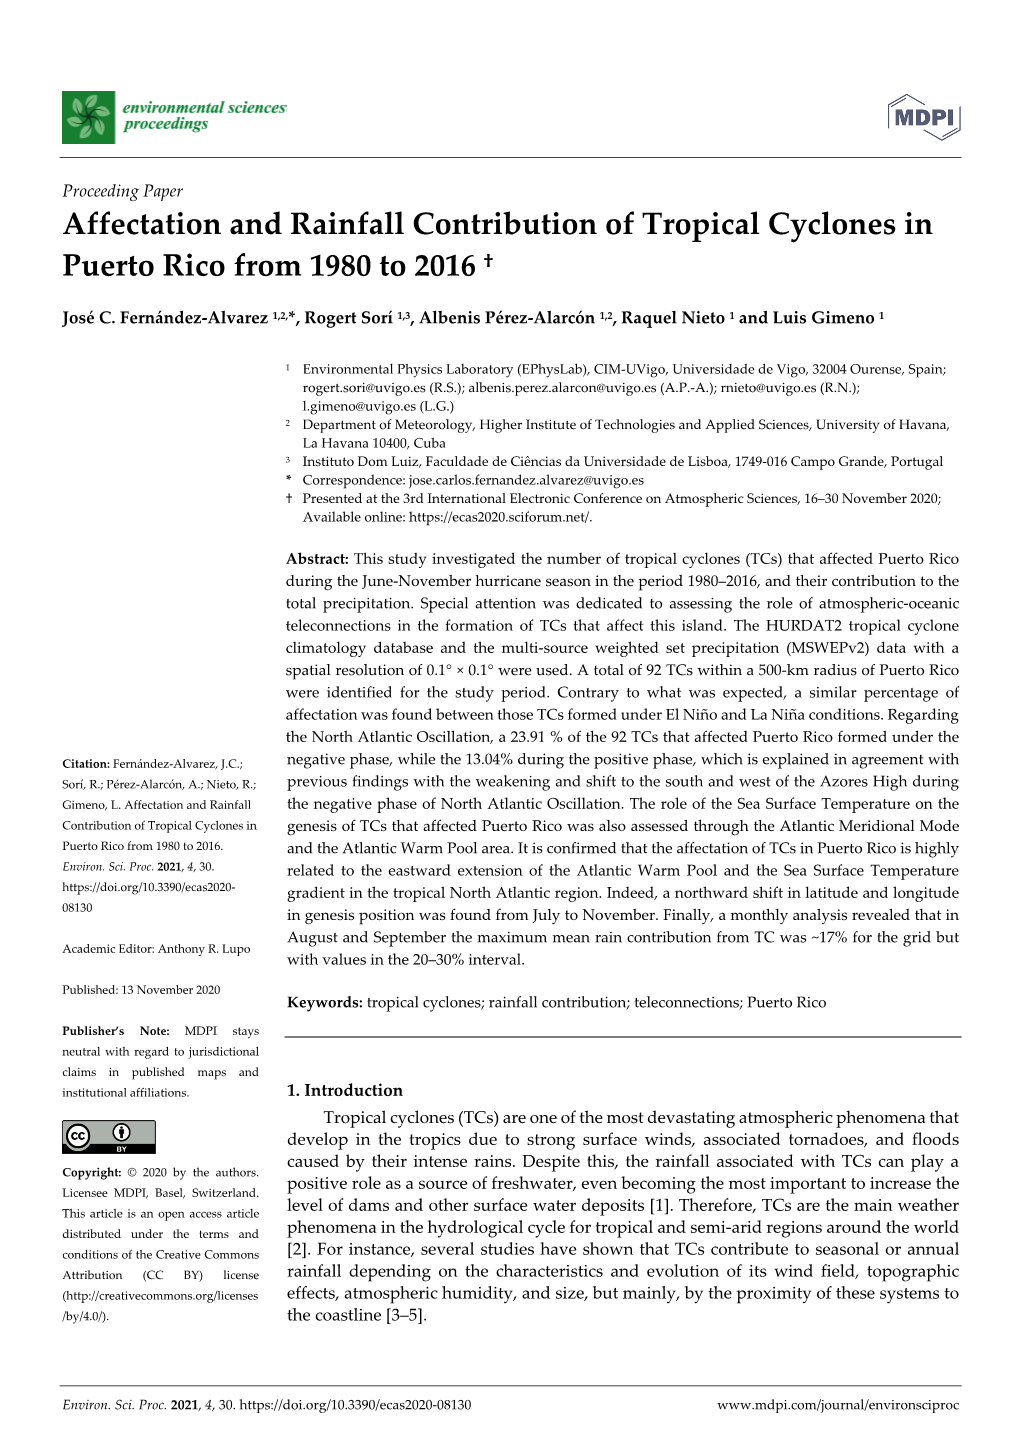 Affectation and Rainfall Contribution of Tropical Cyclones in Puerto Rico from 1980 to 2016 †